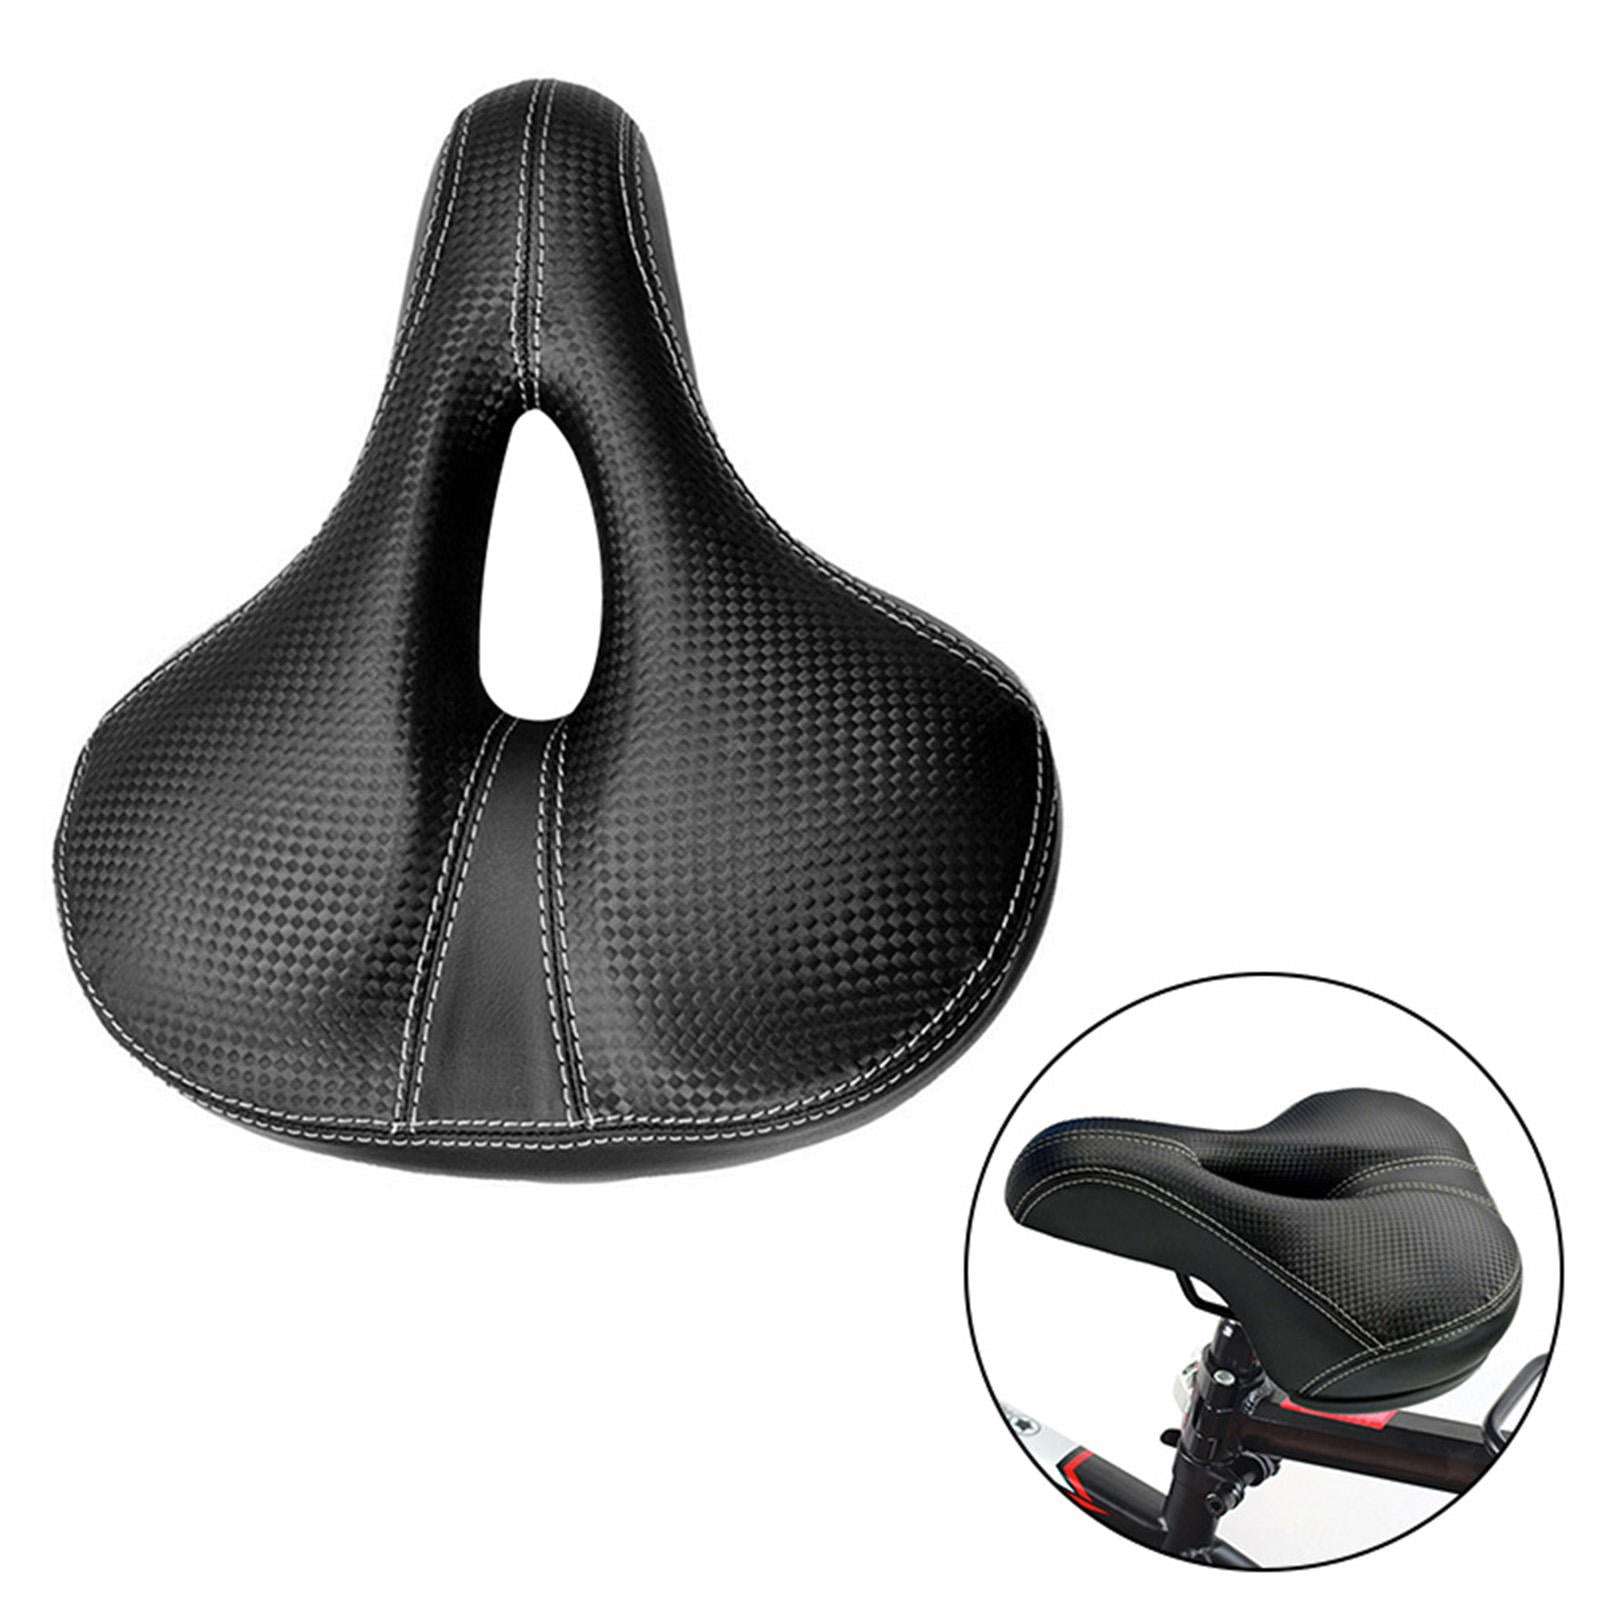 Comfortable Bike Seat Cushion -Bicycle Seat for Men Women with Double Shock